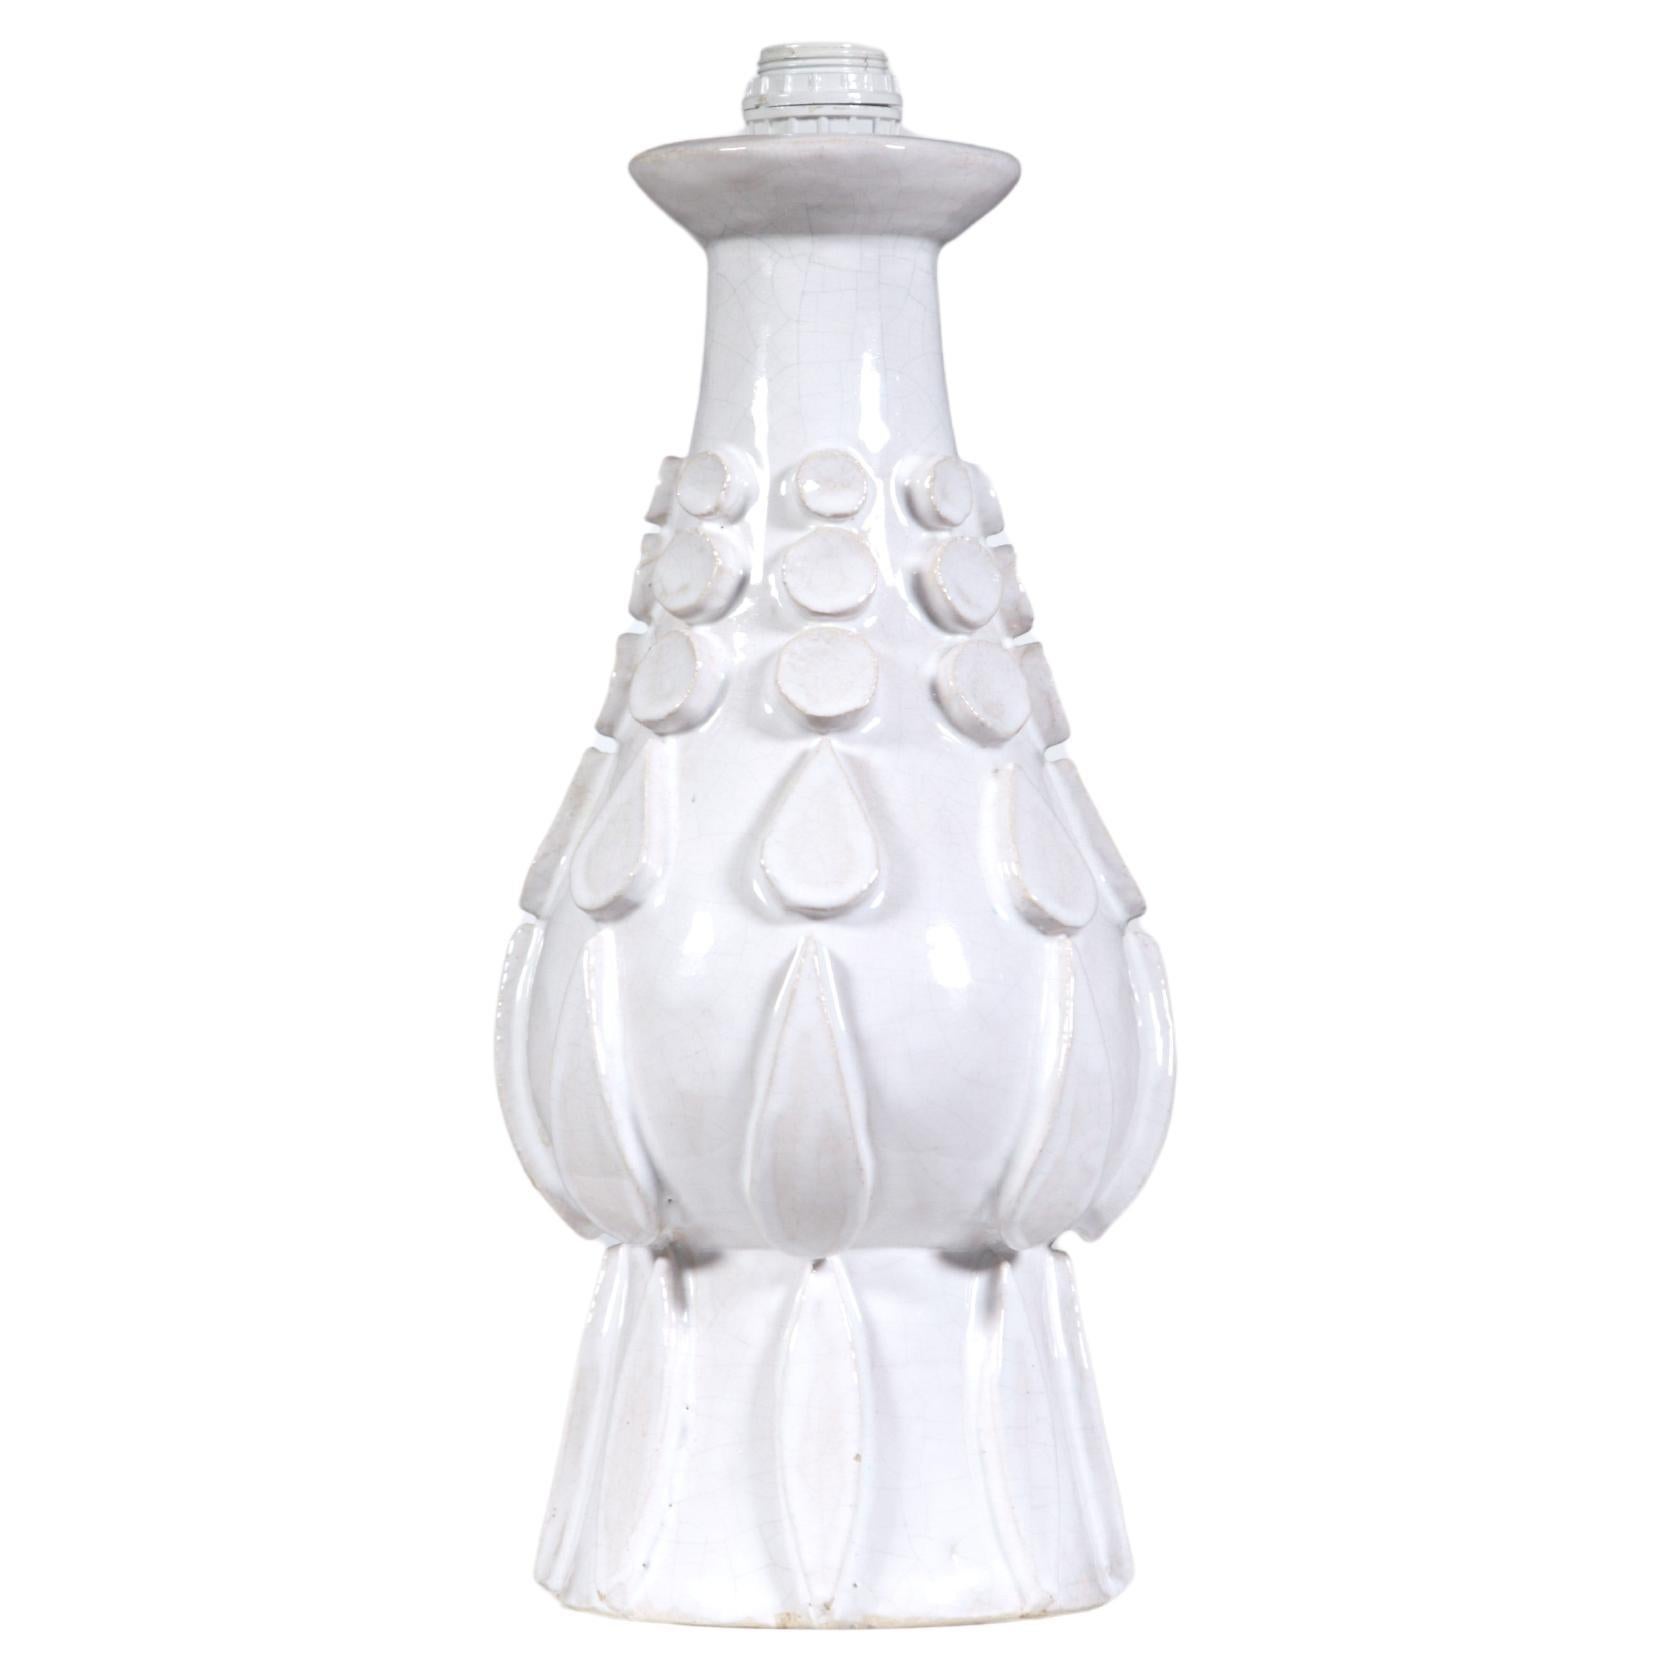 A Sculptural Ceramic Lamp by Marie Kaikinger France 1970s For Sale